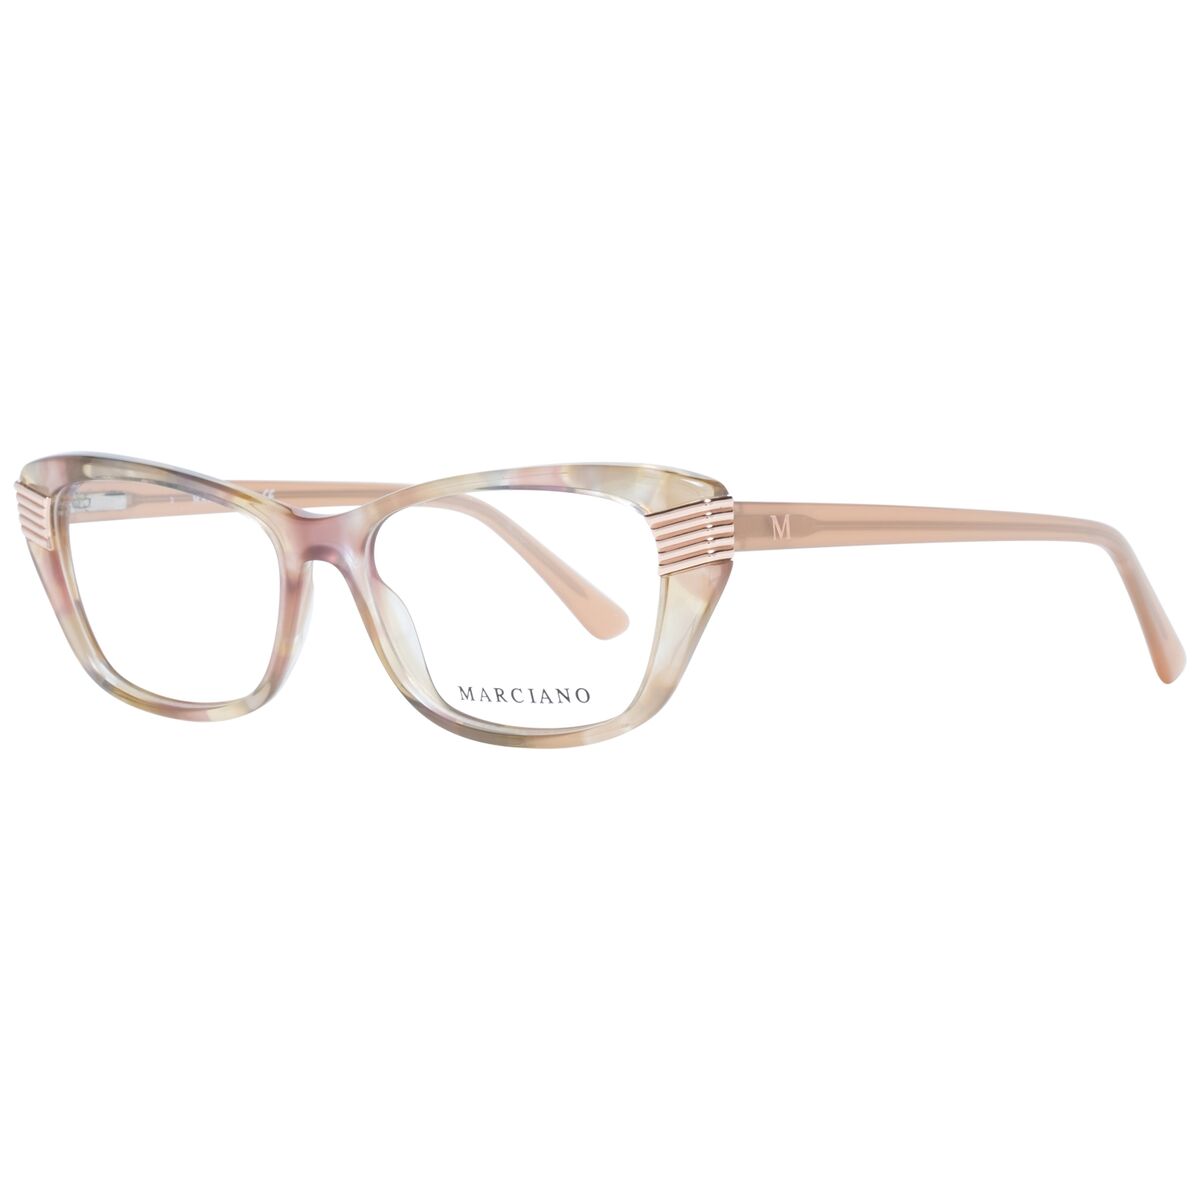 Ladies' Spectacle frame Guess Marciano GM0385 53059 - Calm Beauty IE